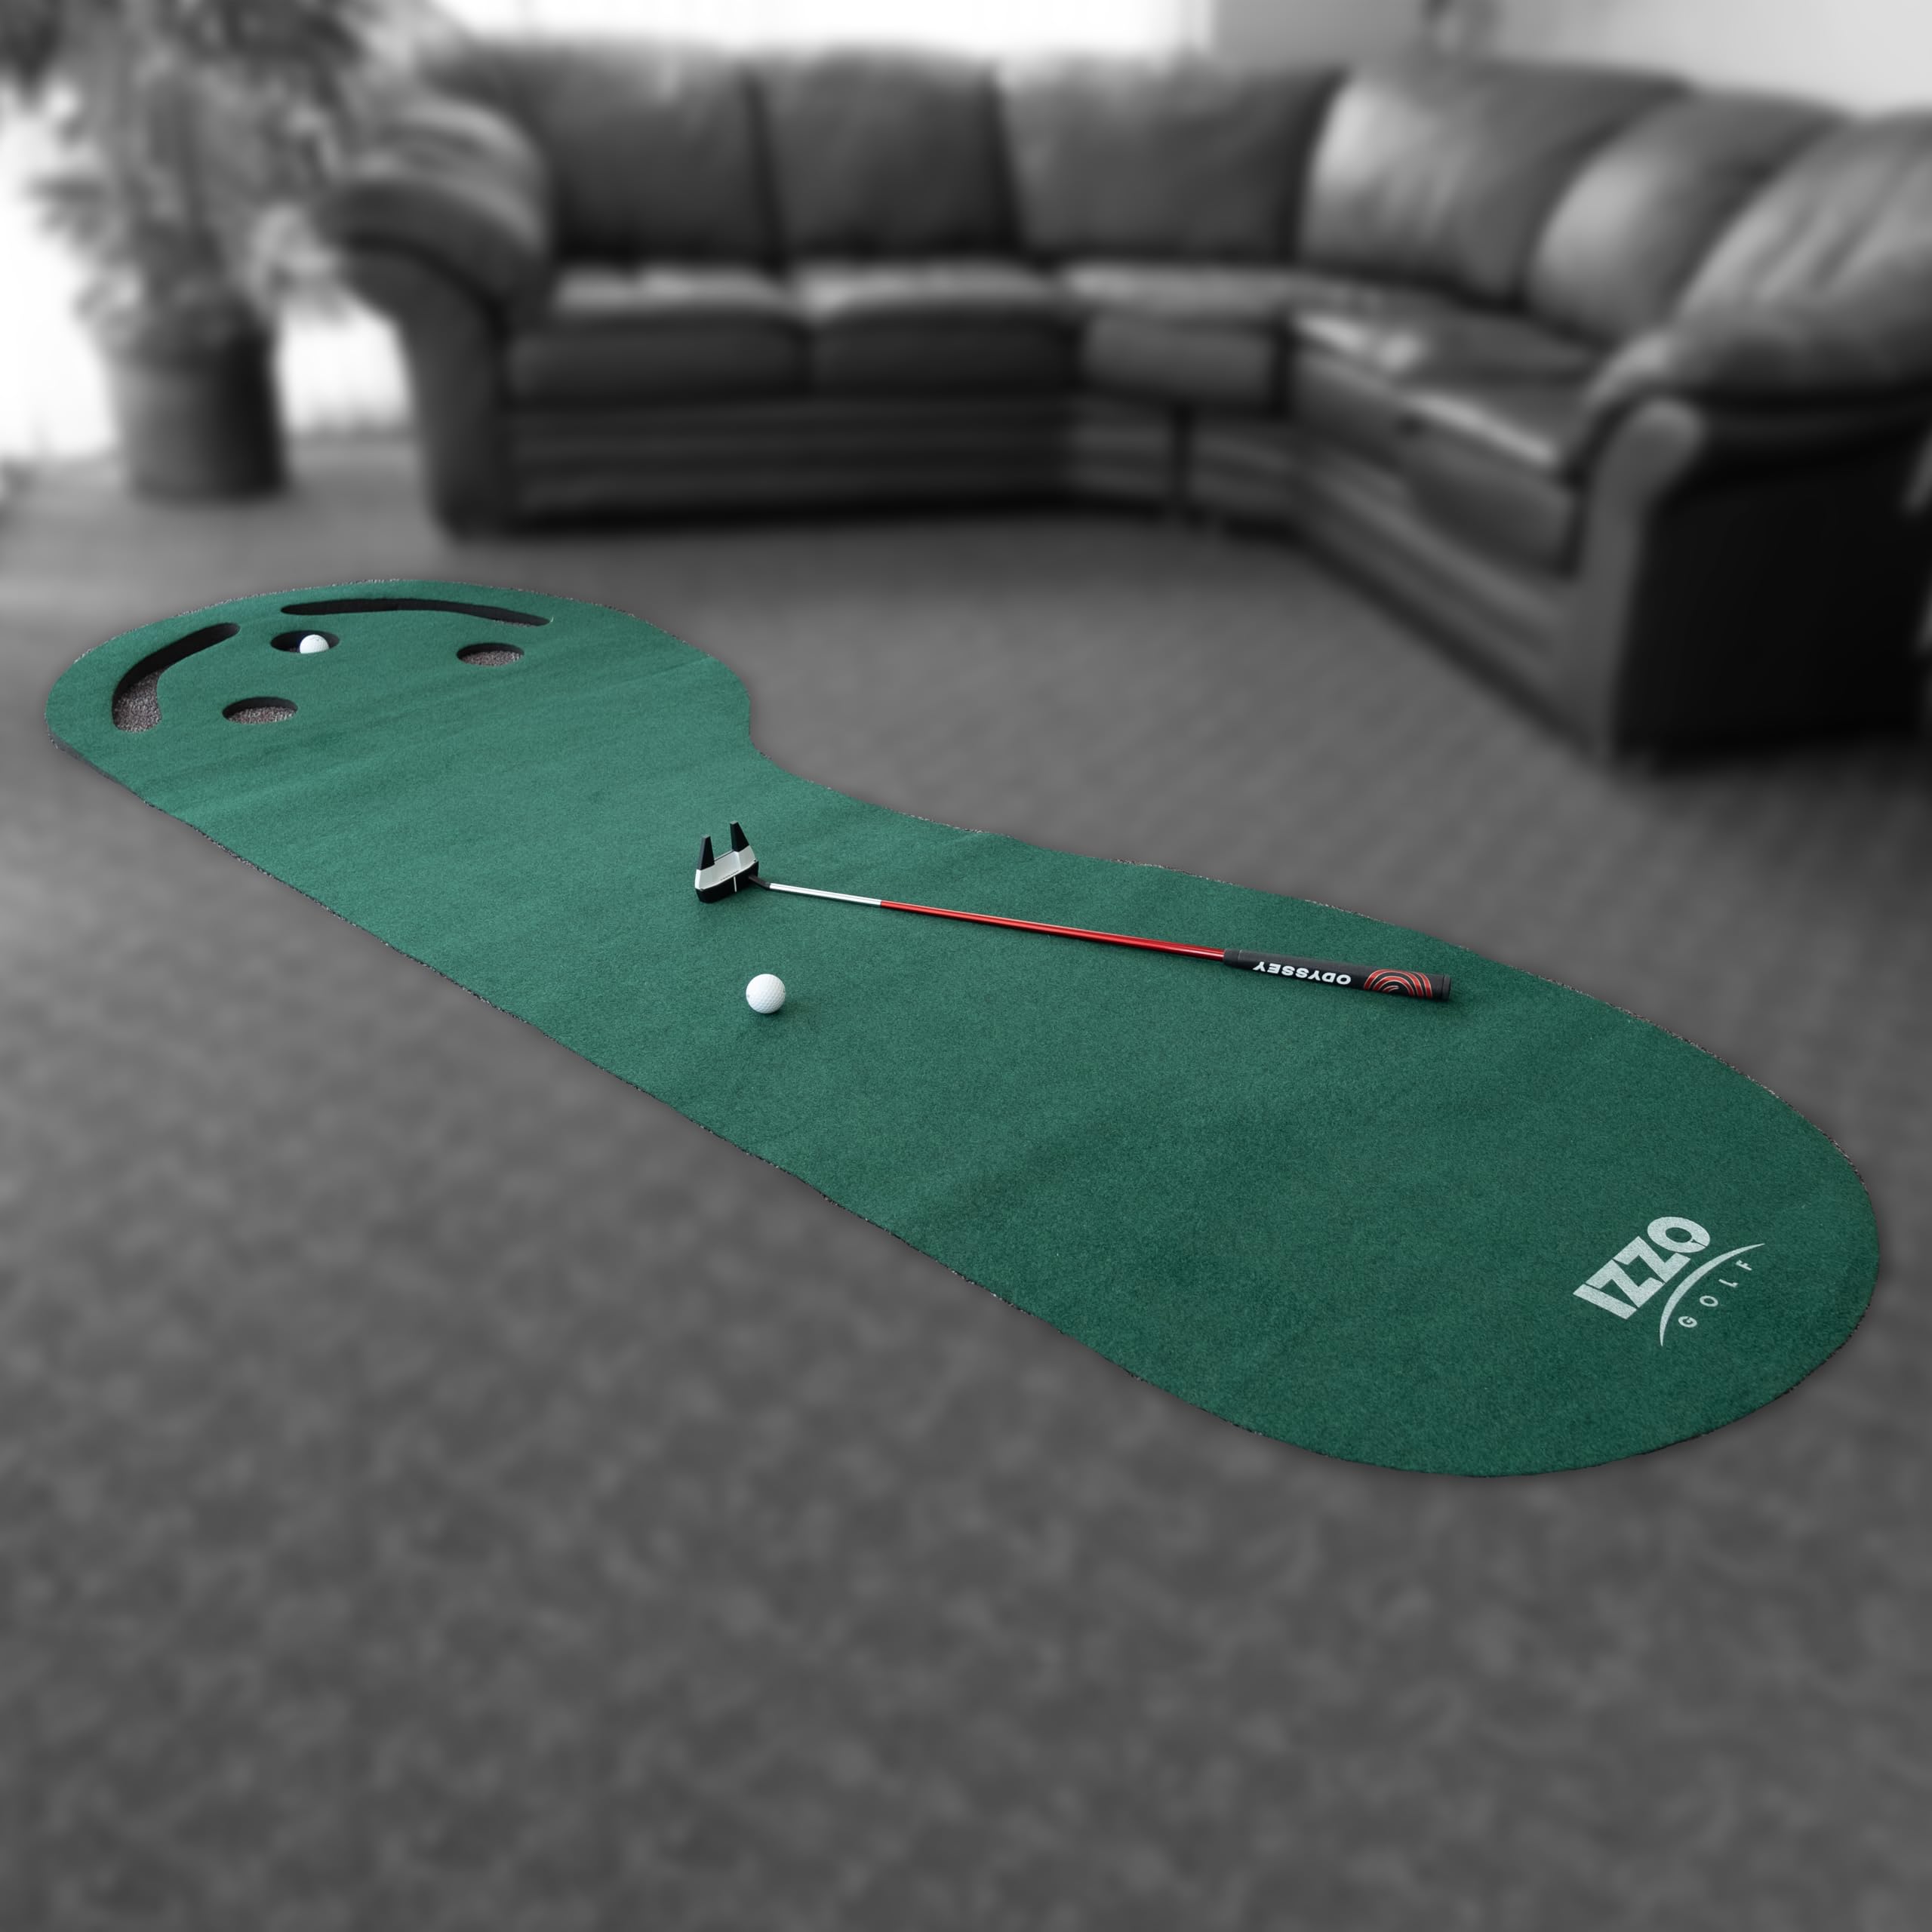 IZZO Golf 3' x 9' 3-Hole Putting Mat - Green Kidney Shaped 3 Hole Putting mat Training aid to Help Practice Putting